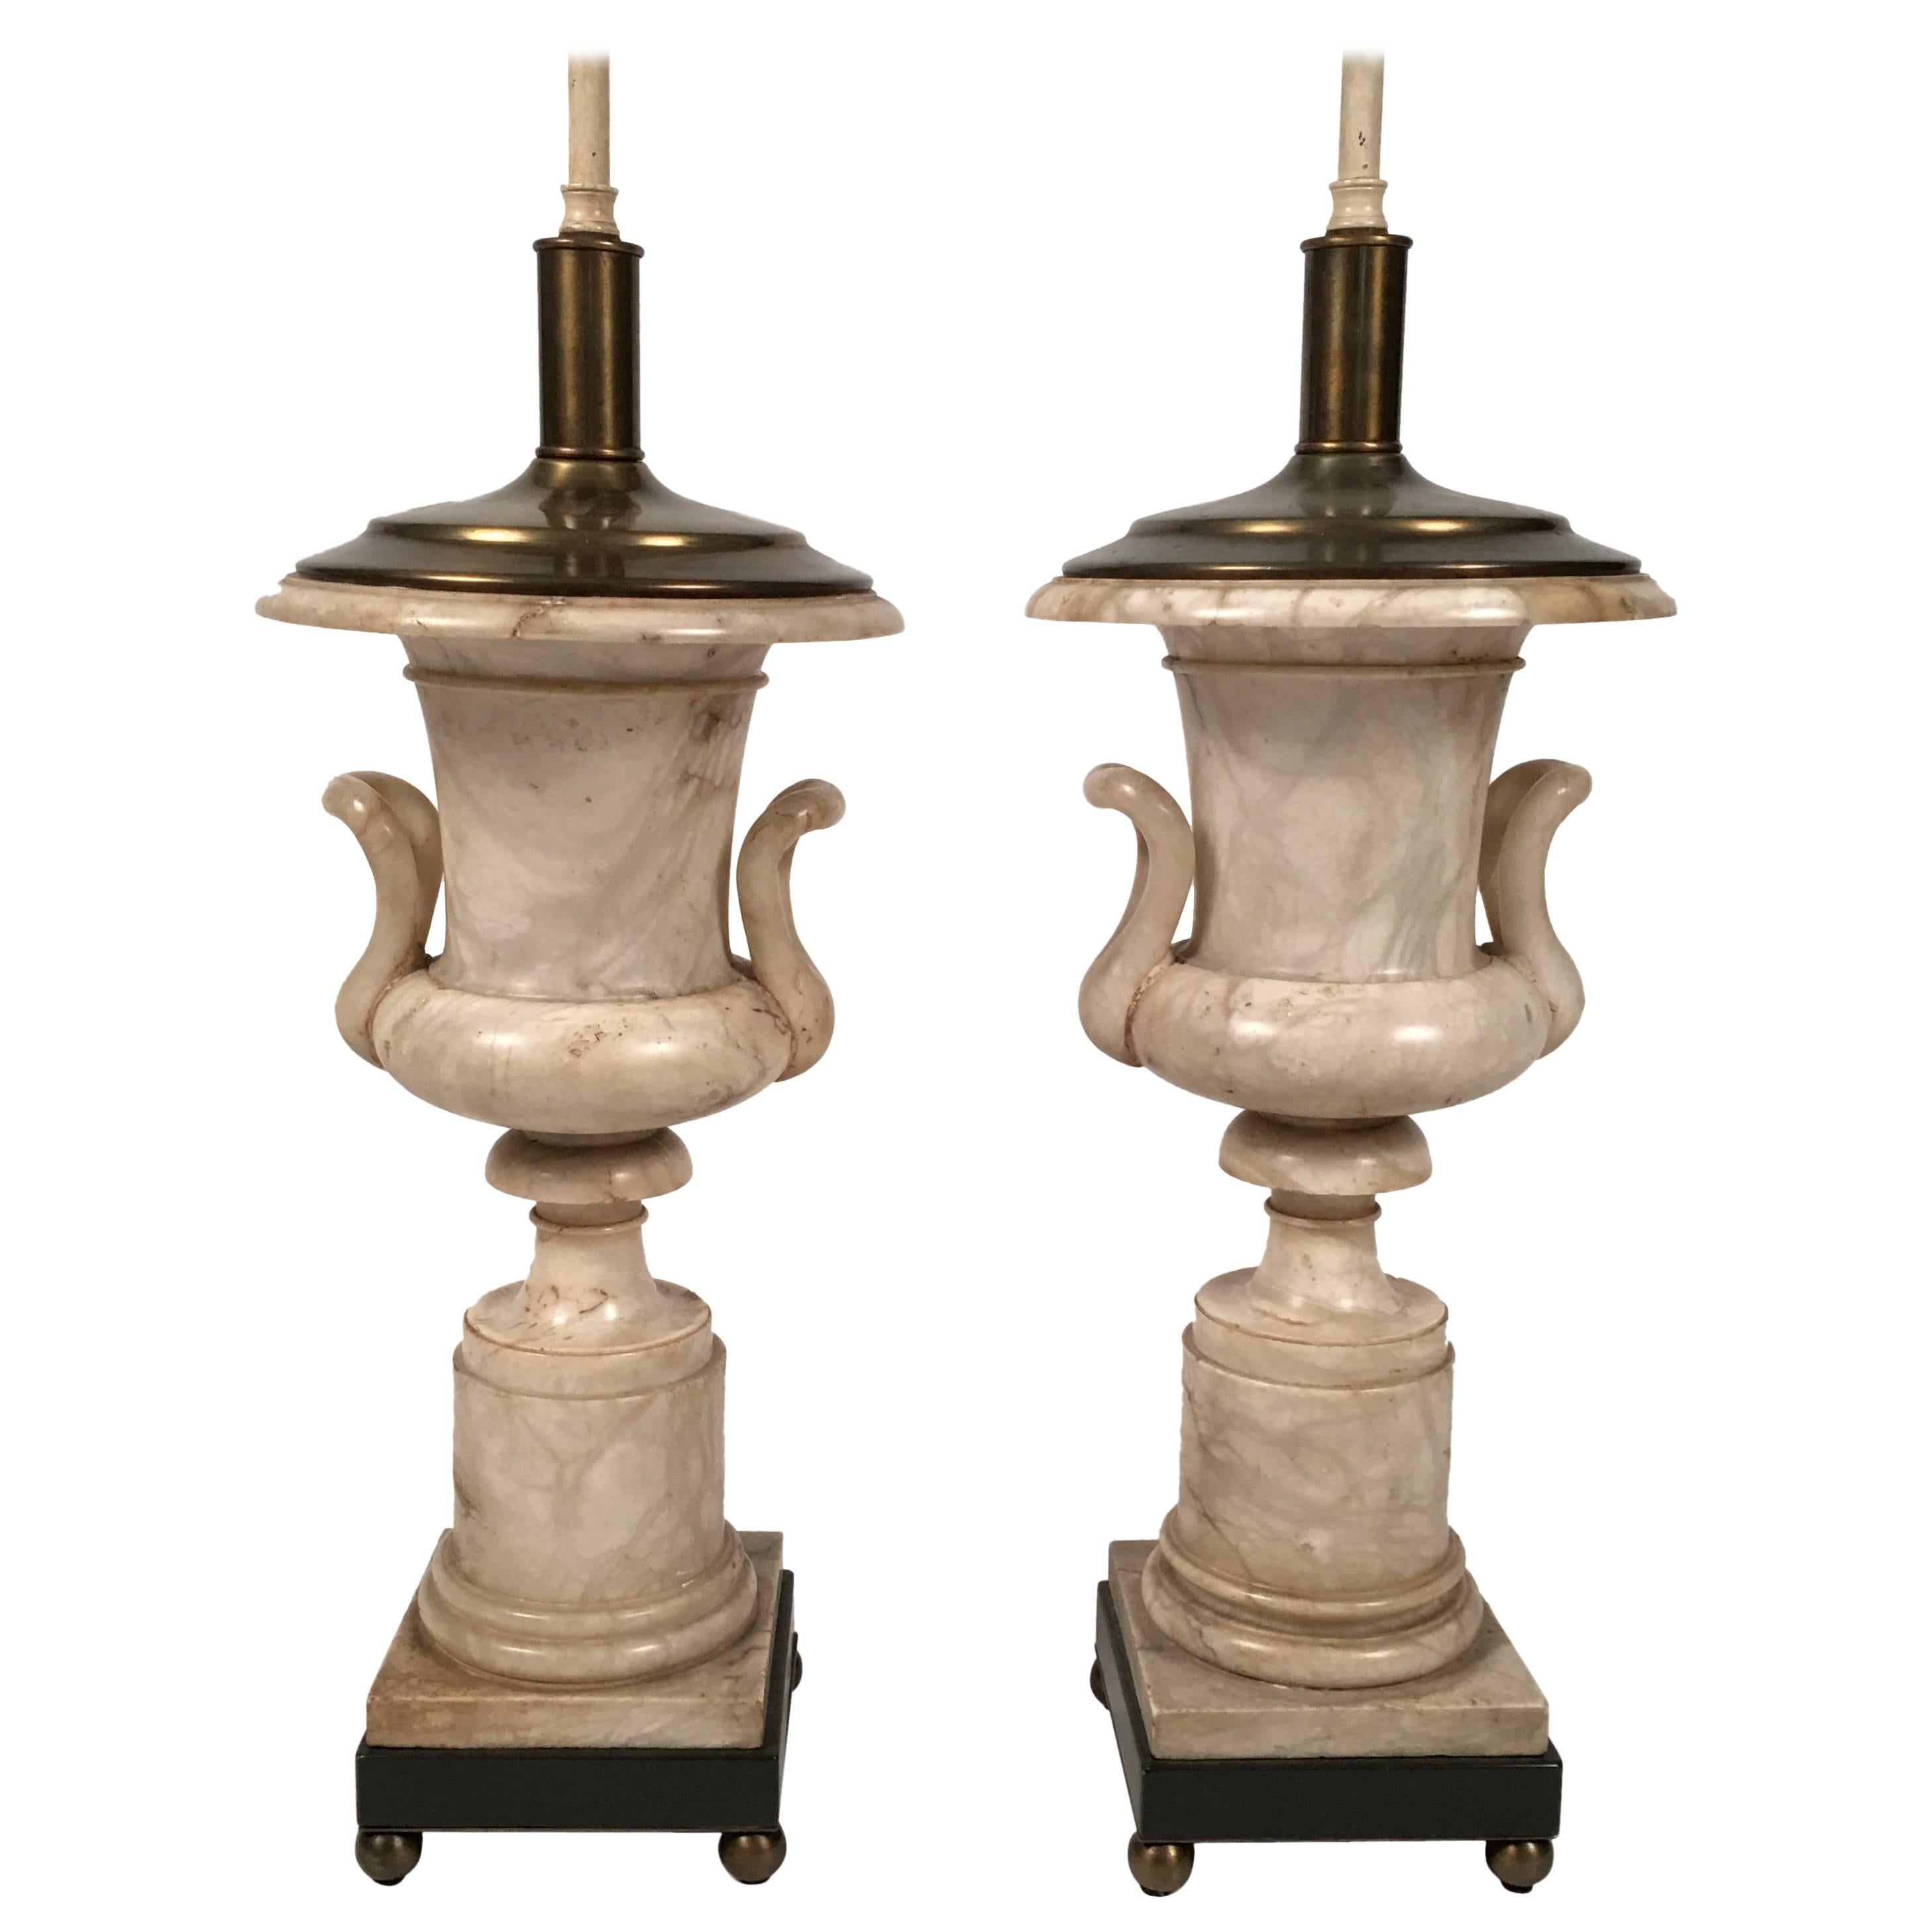 A pair of Italian Neoclassical style marble campana (bell shaped) urn-form lamps in alabaster, each mounted on charcoal grey wood bases with brass plates underneath, raised on four brass ball feet. Ceramic ball finials. New linen shades with bands